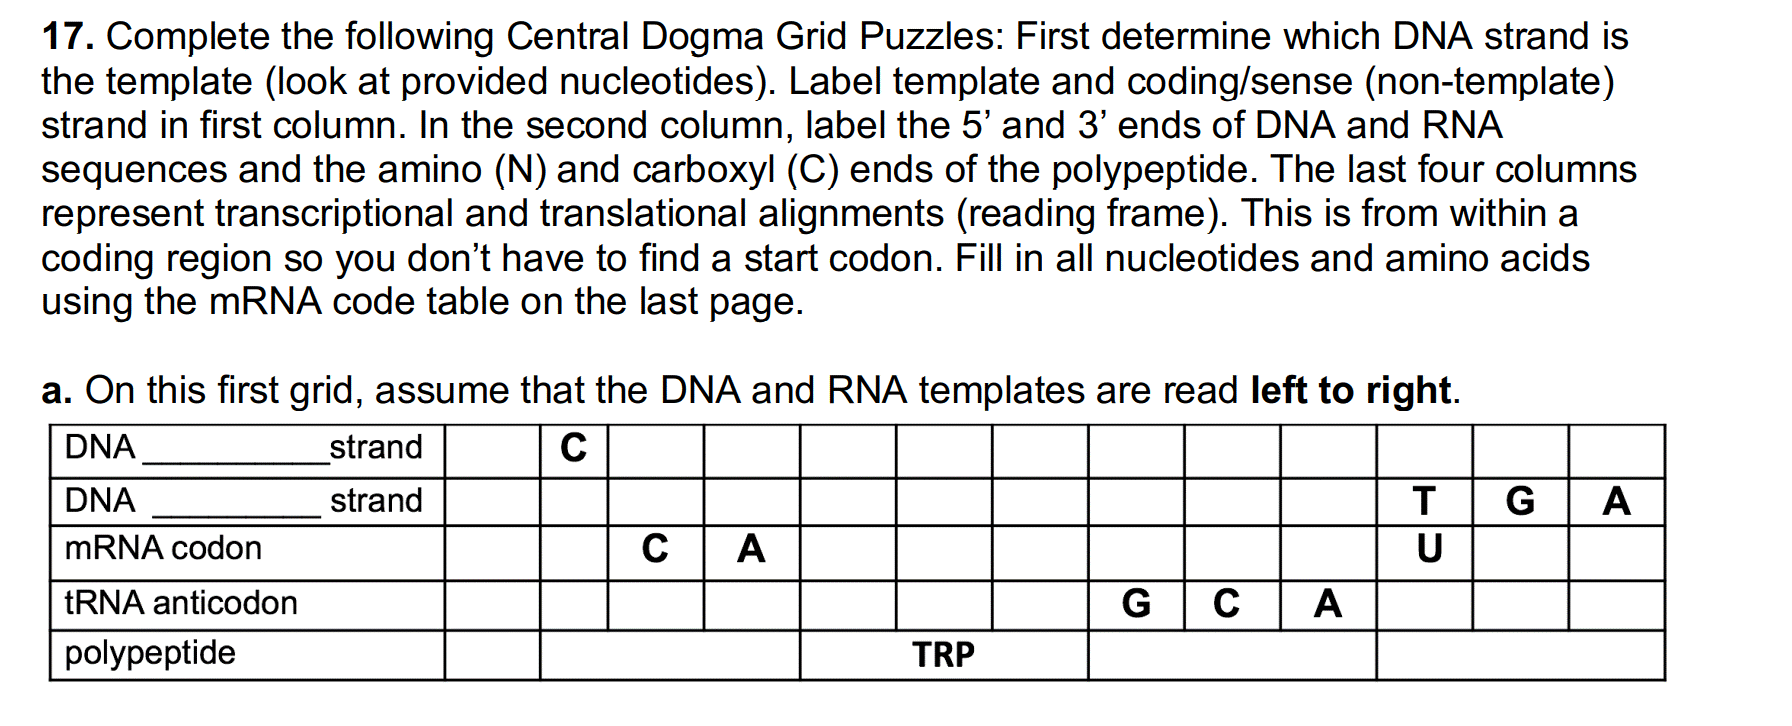 17. Complete the following Central Dogma Grid Puzzles: First determine which DNA strand is
the template (look at provided nucleotides). Label template and coding/sense (non-template)
strand in first column. In the second column, label the 5' and 3' ends of DNA and RNA
sequences and the amino (N) and carboxyl (C) ends of the polypeptide. The last four columns
represent transcriptional and translational alignments (reading frame). This is from within a
coding region so you don't have to find a start codon. Fill in all nucleotides and amino acids
using the mRNA code table on the last page.
a. On this first grid, assume that the DNA and RNA templates are read left to right.
DNA
strand
C
DNA
strand
G
mRNA codon
A
U
TRNA anticodon
A
polypeptide
TRP
